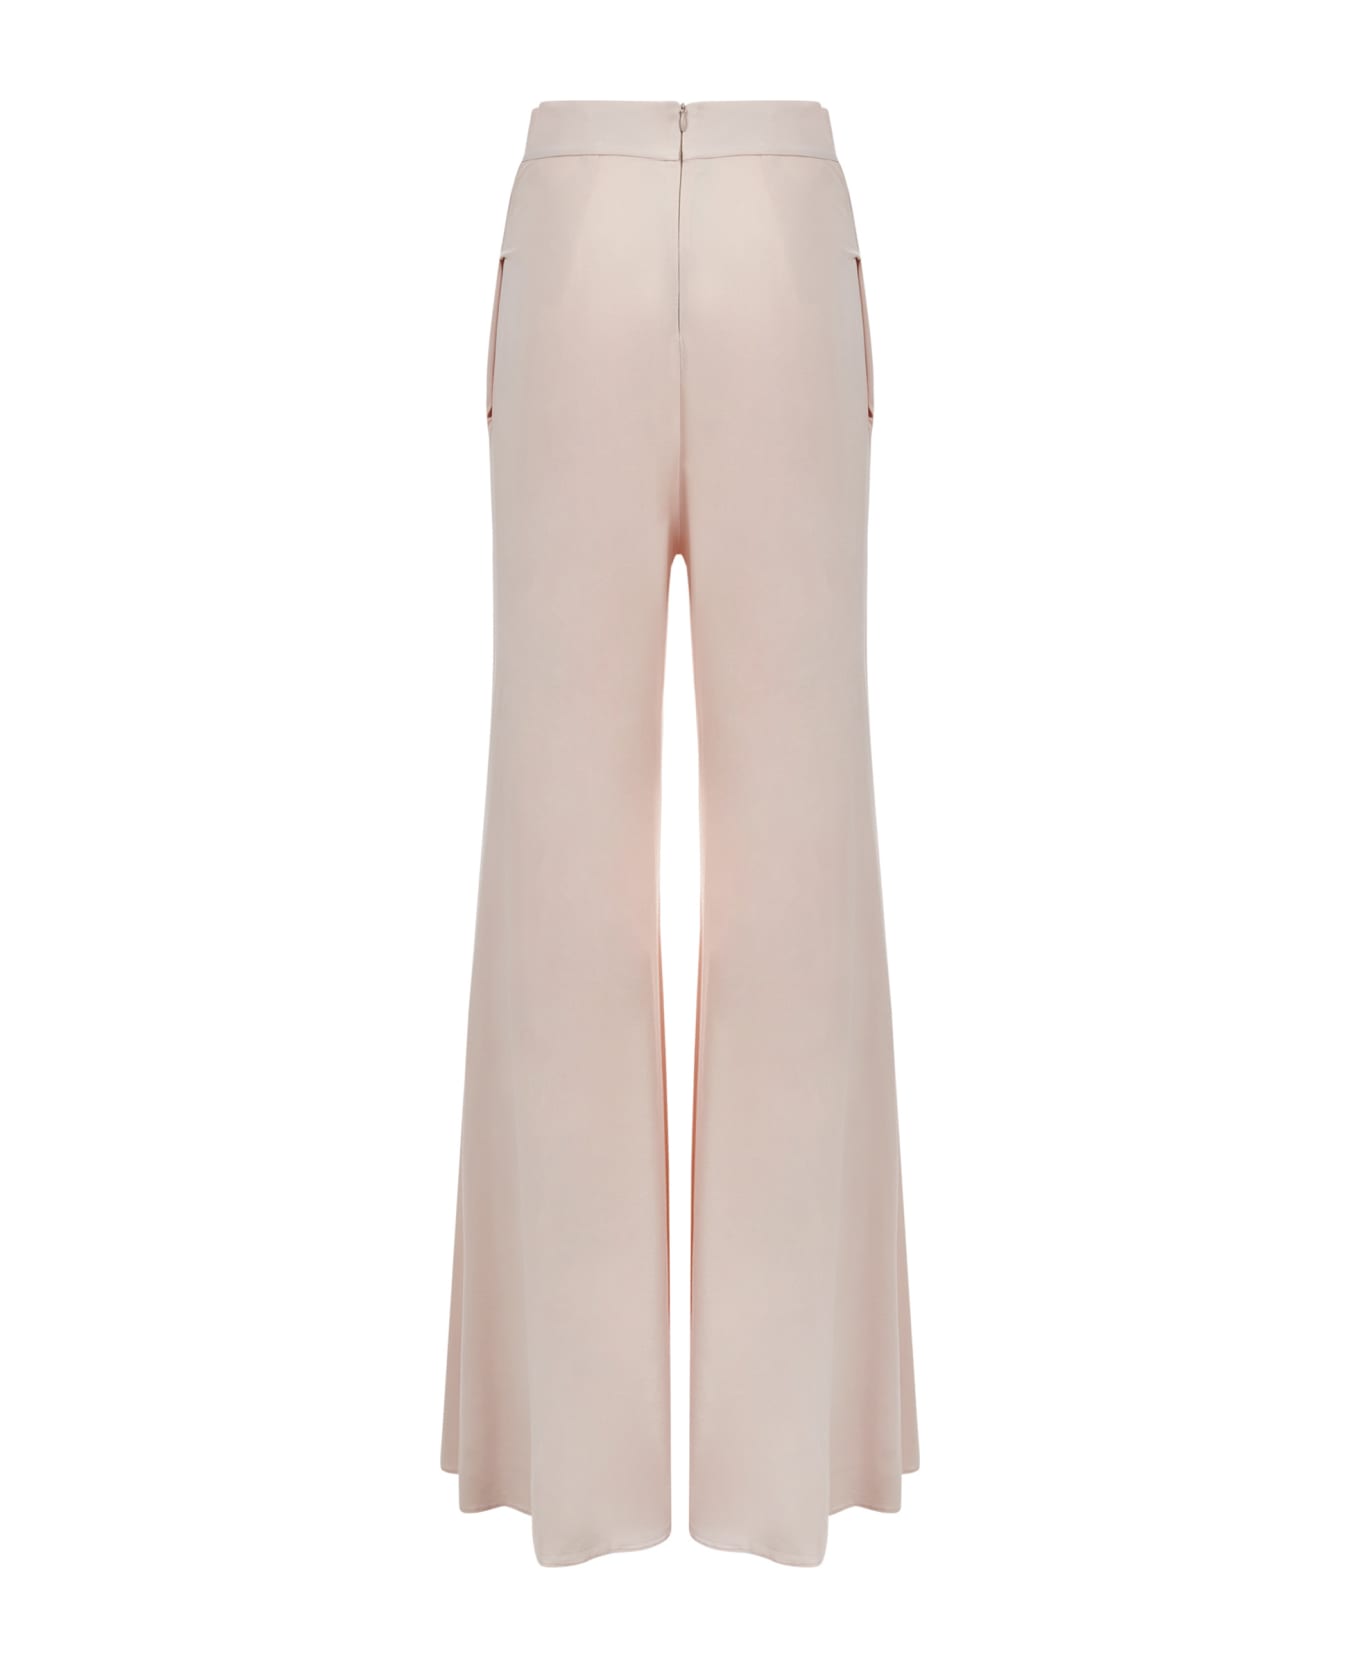 Alexandre Vauthier Trousers - PINK ボトムス